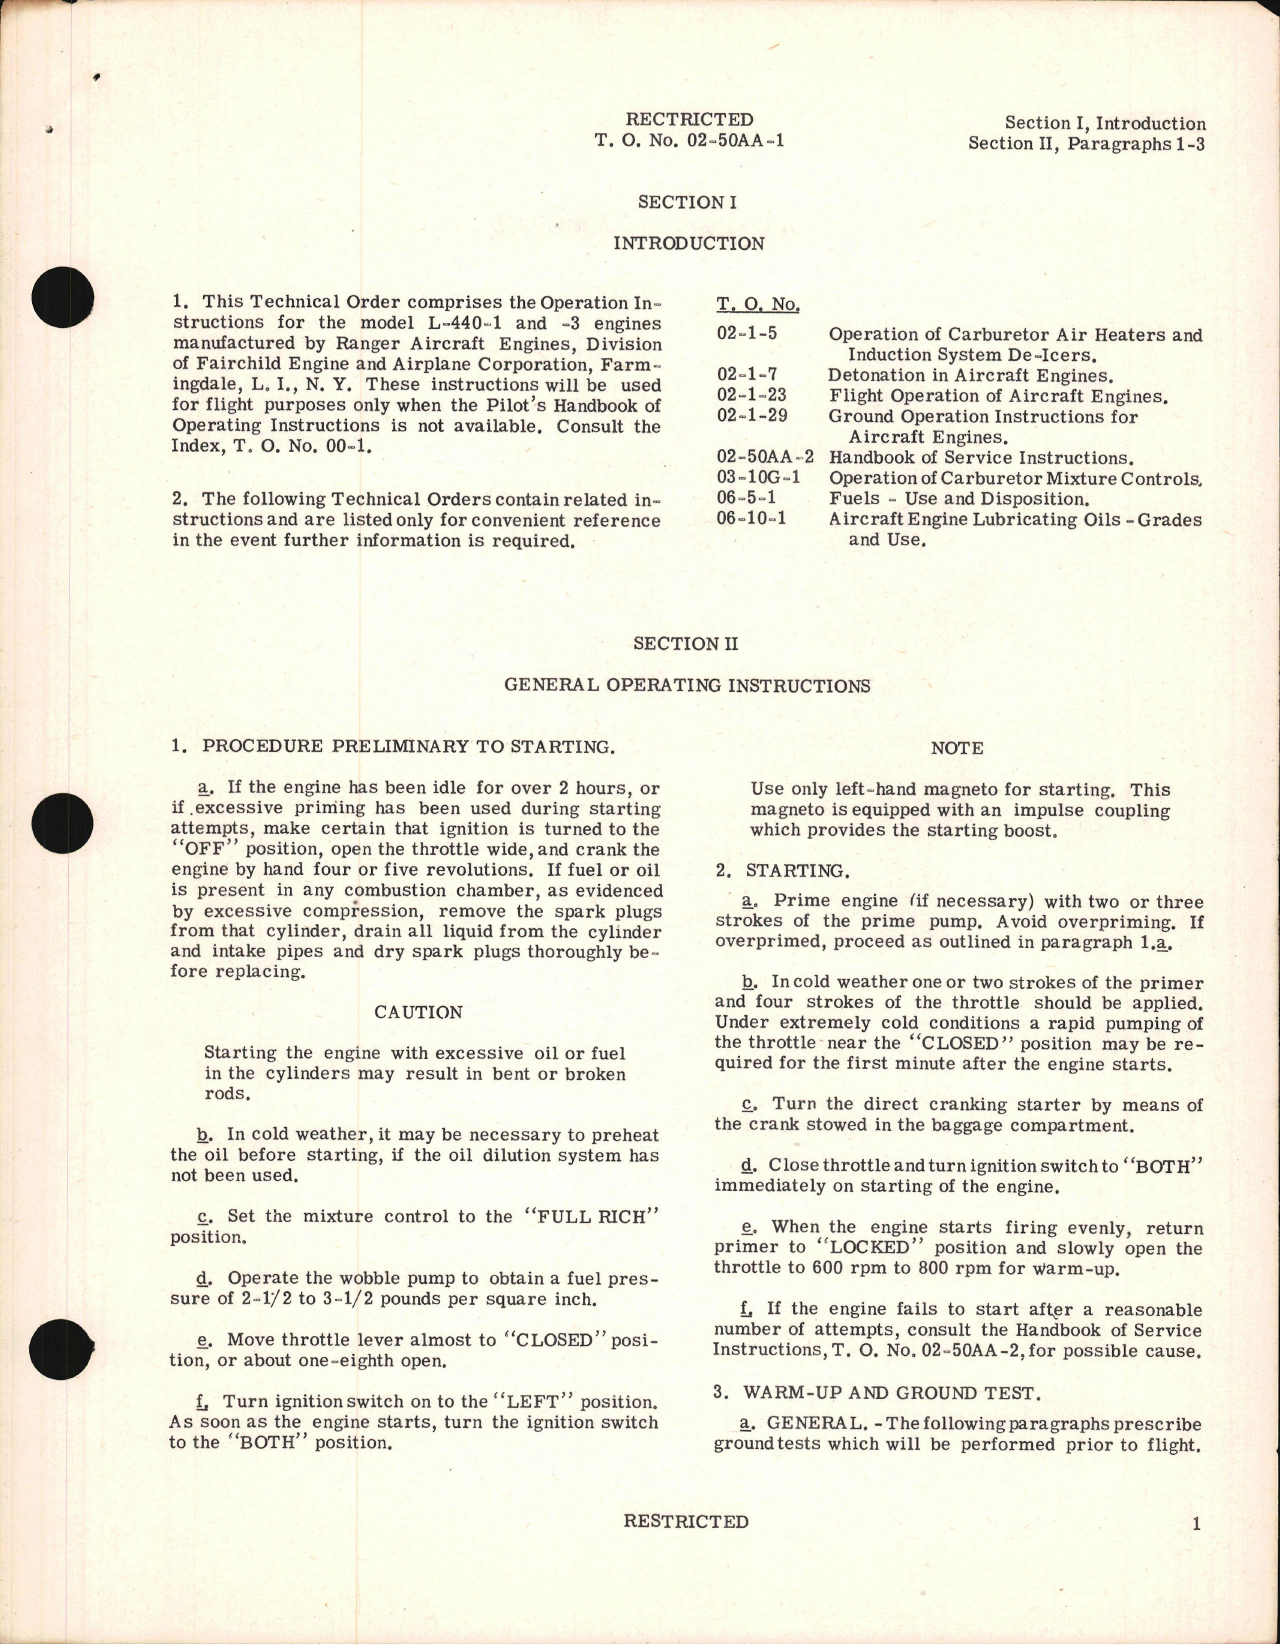 Sample page 5 from AirCorps Library document: Operating Instructions for L-440-1 and L-440-3 Engines